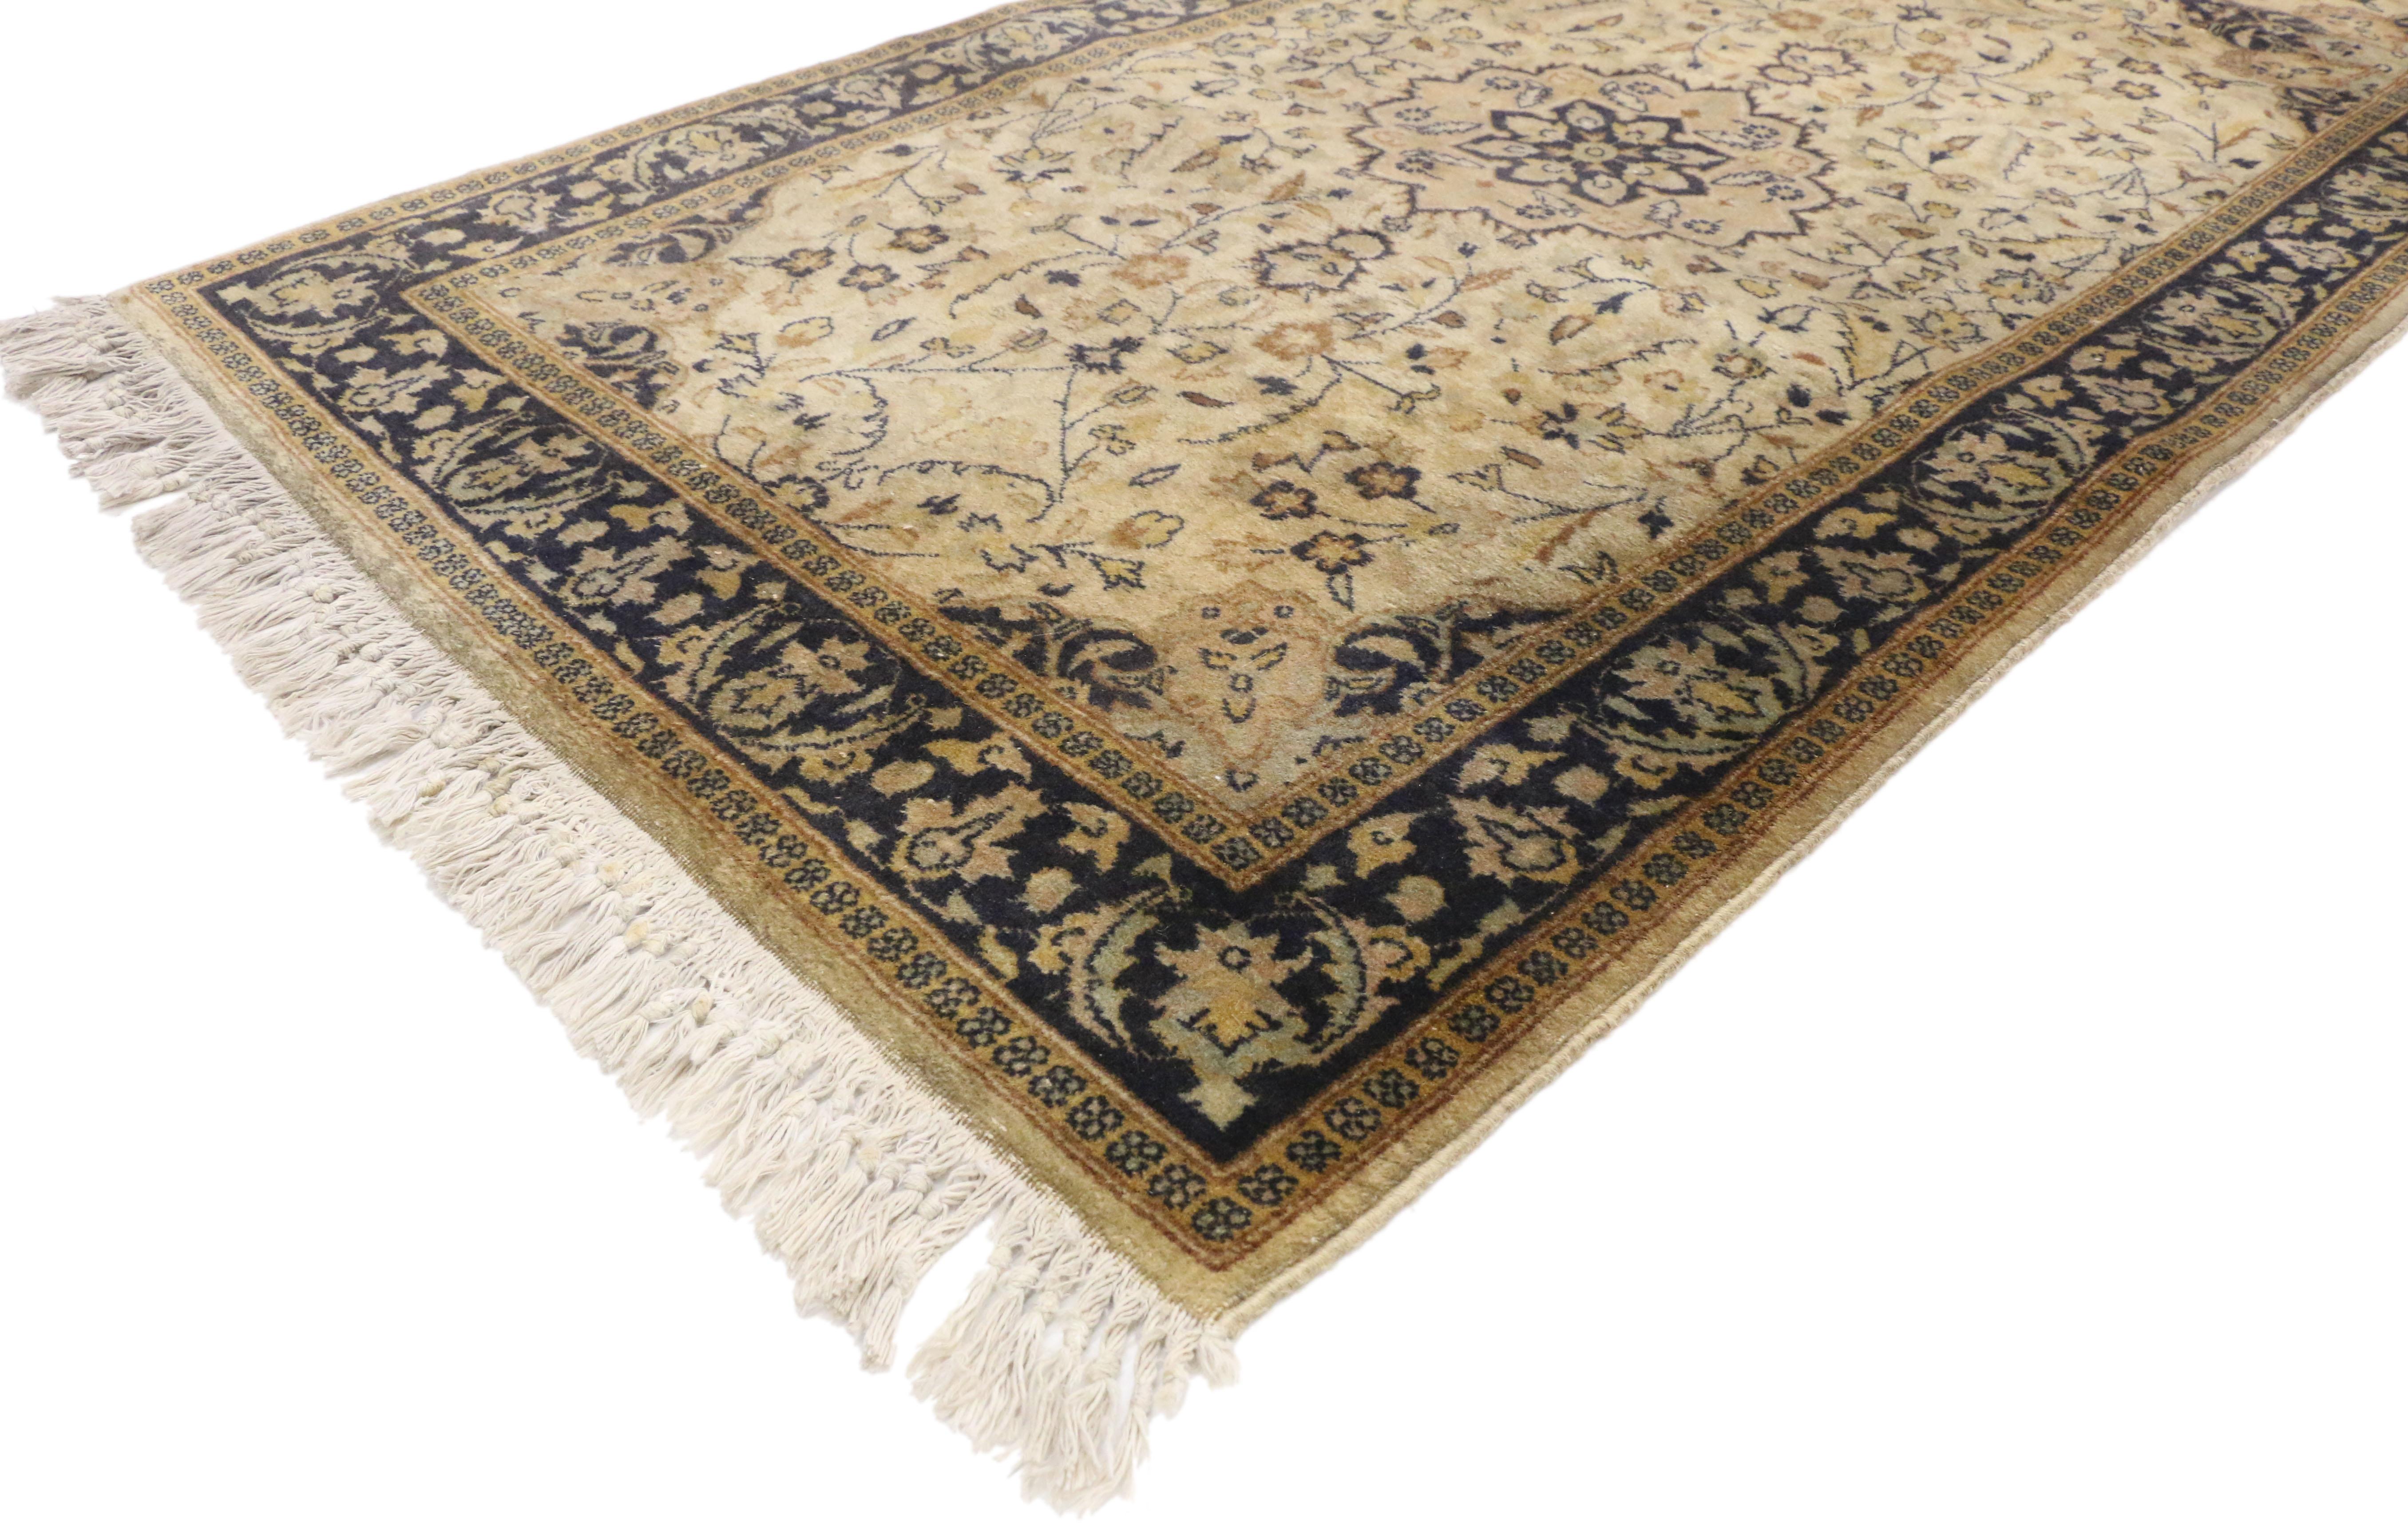 74890 Vintage Pakistani Isfahan Runner, 02'08 x 07'11. Pakistan Isfahan rug runners are handwoven rugs made in Pakistan, drawing inspiration from the intricate designs of traditional Isfahan rugs from Iran. These rugs typically feature elaborate